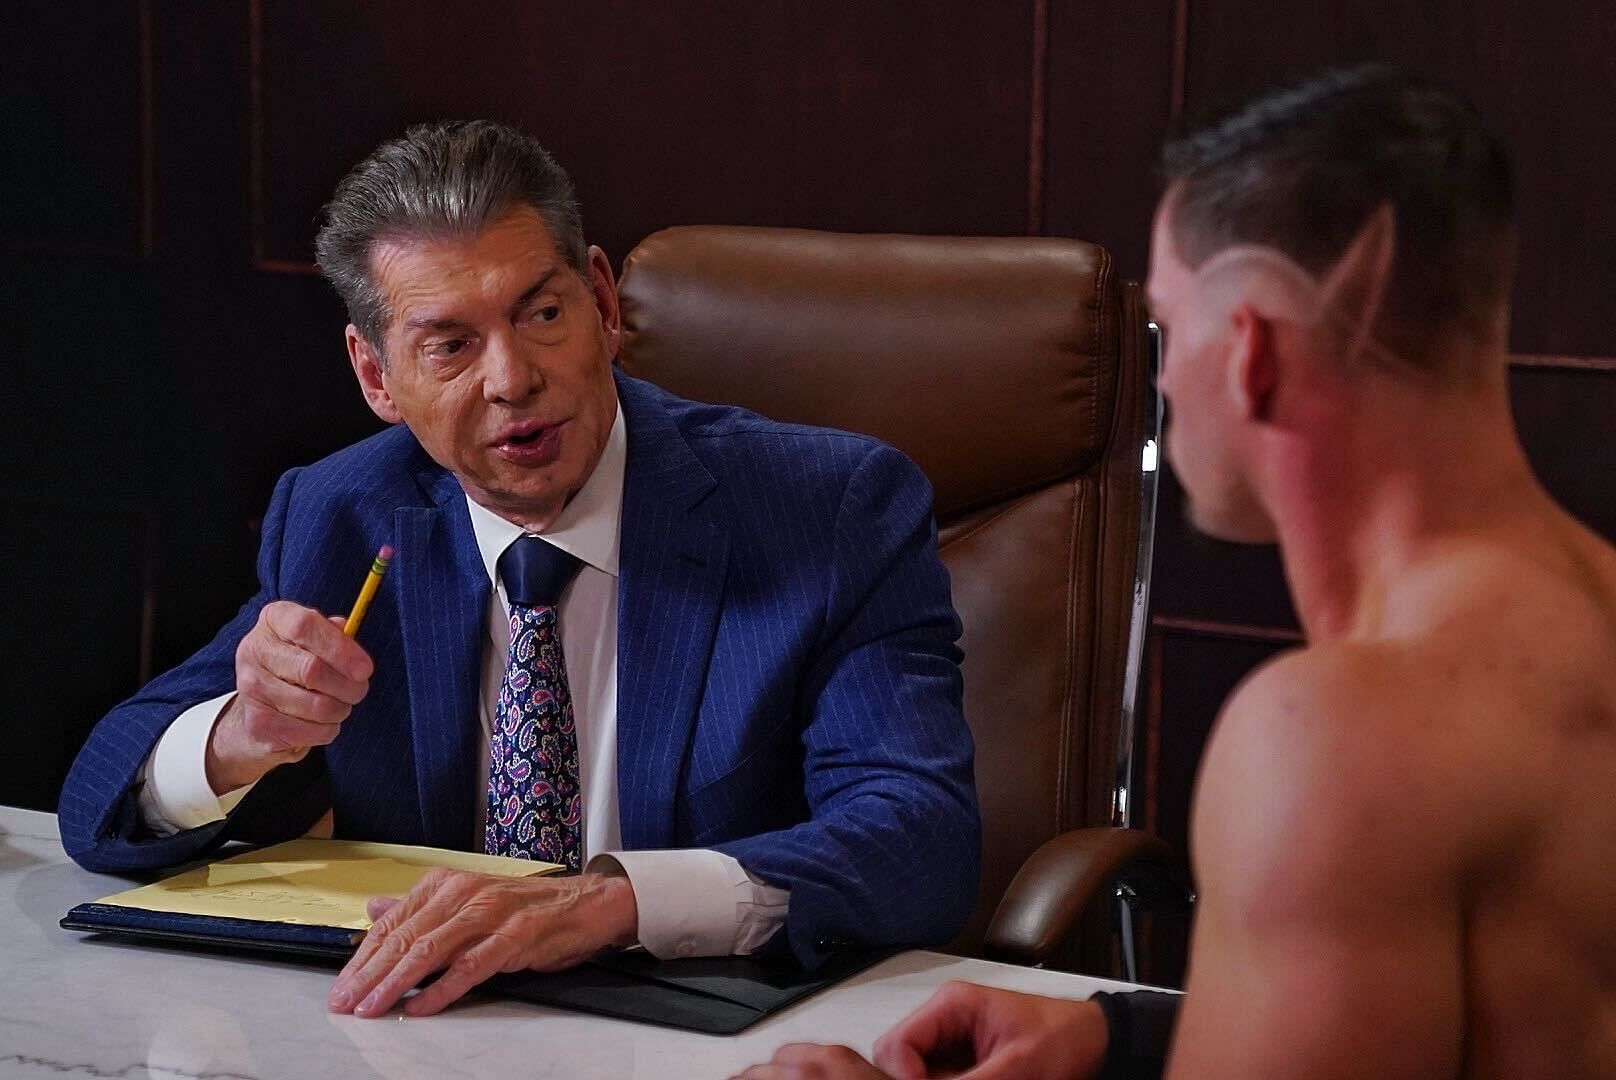 Are the Vince McMahon - Austin Theory segments working for you?